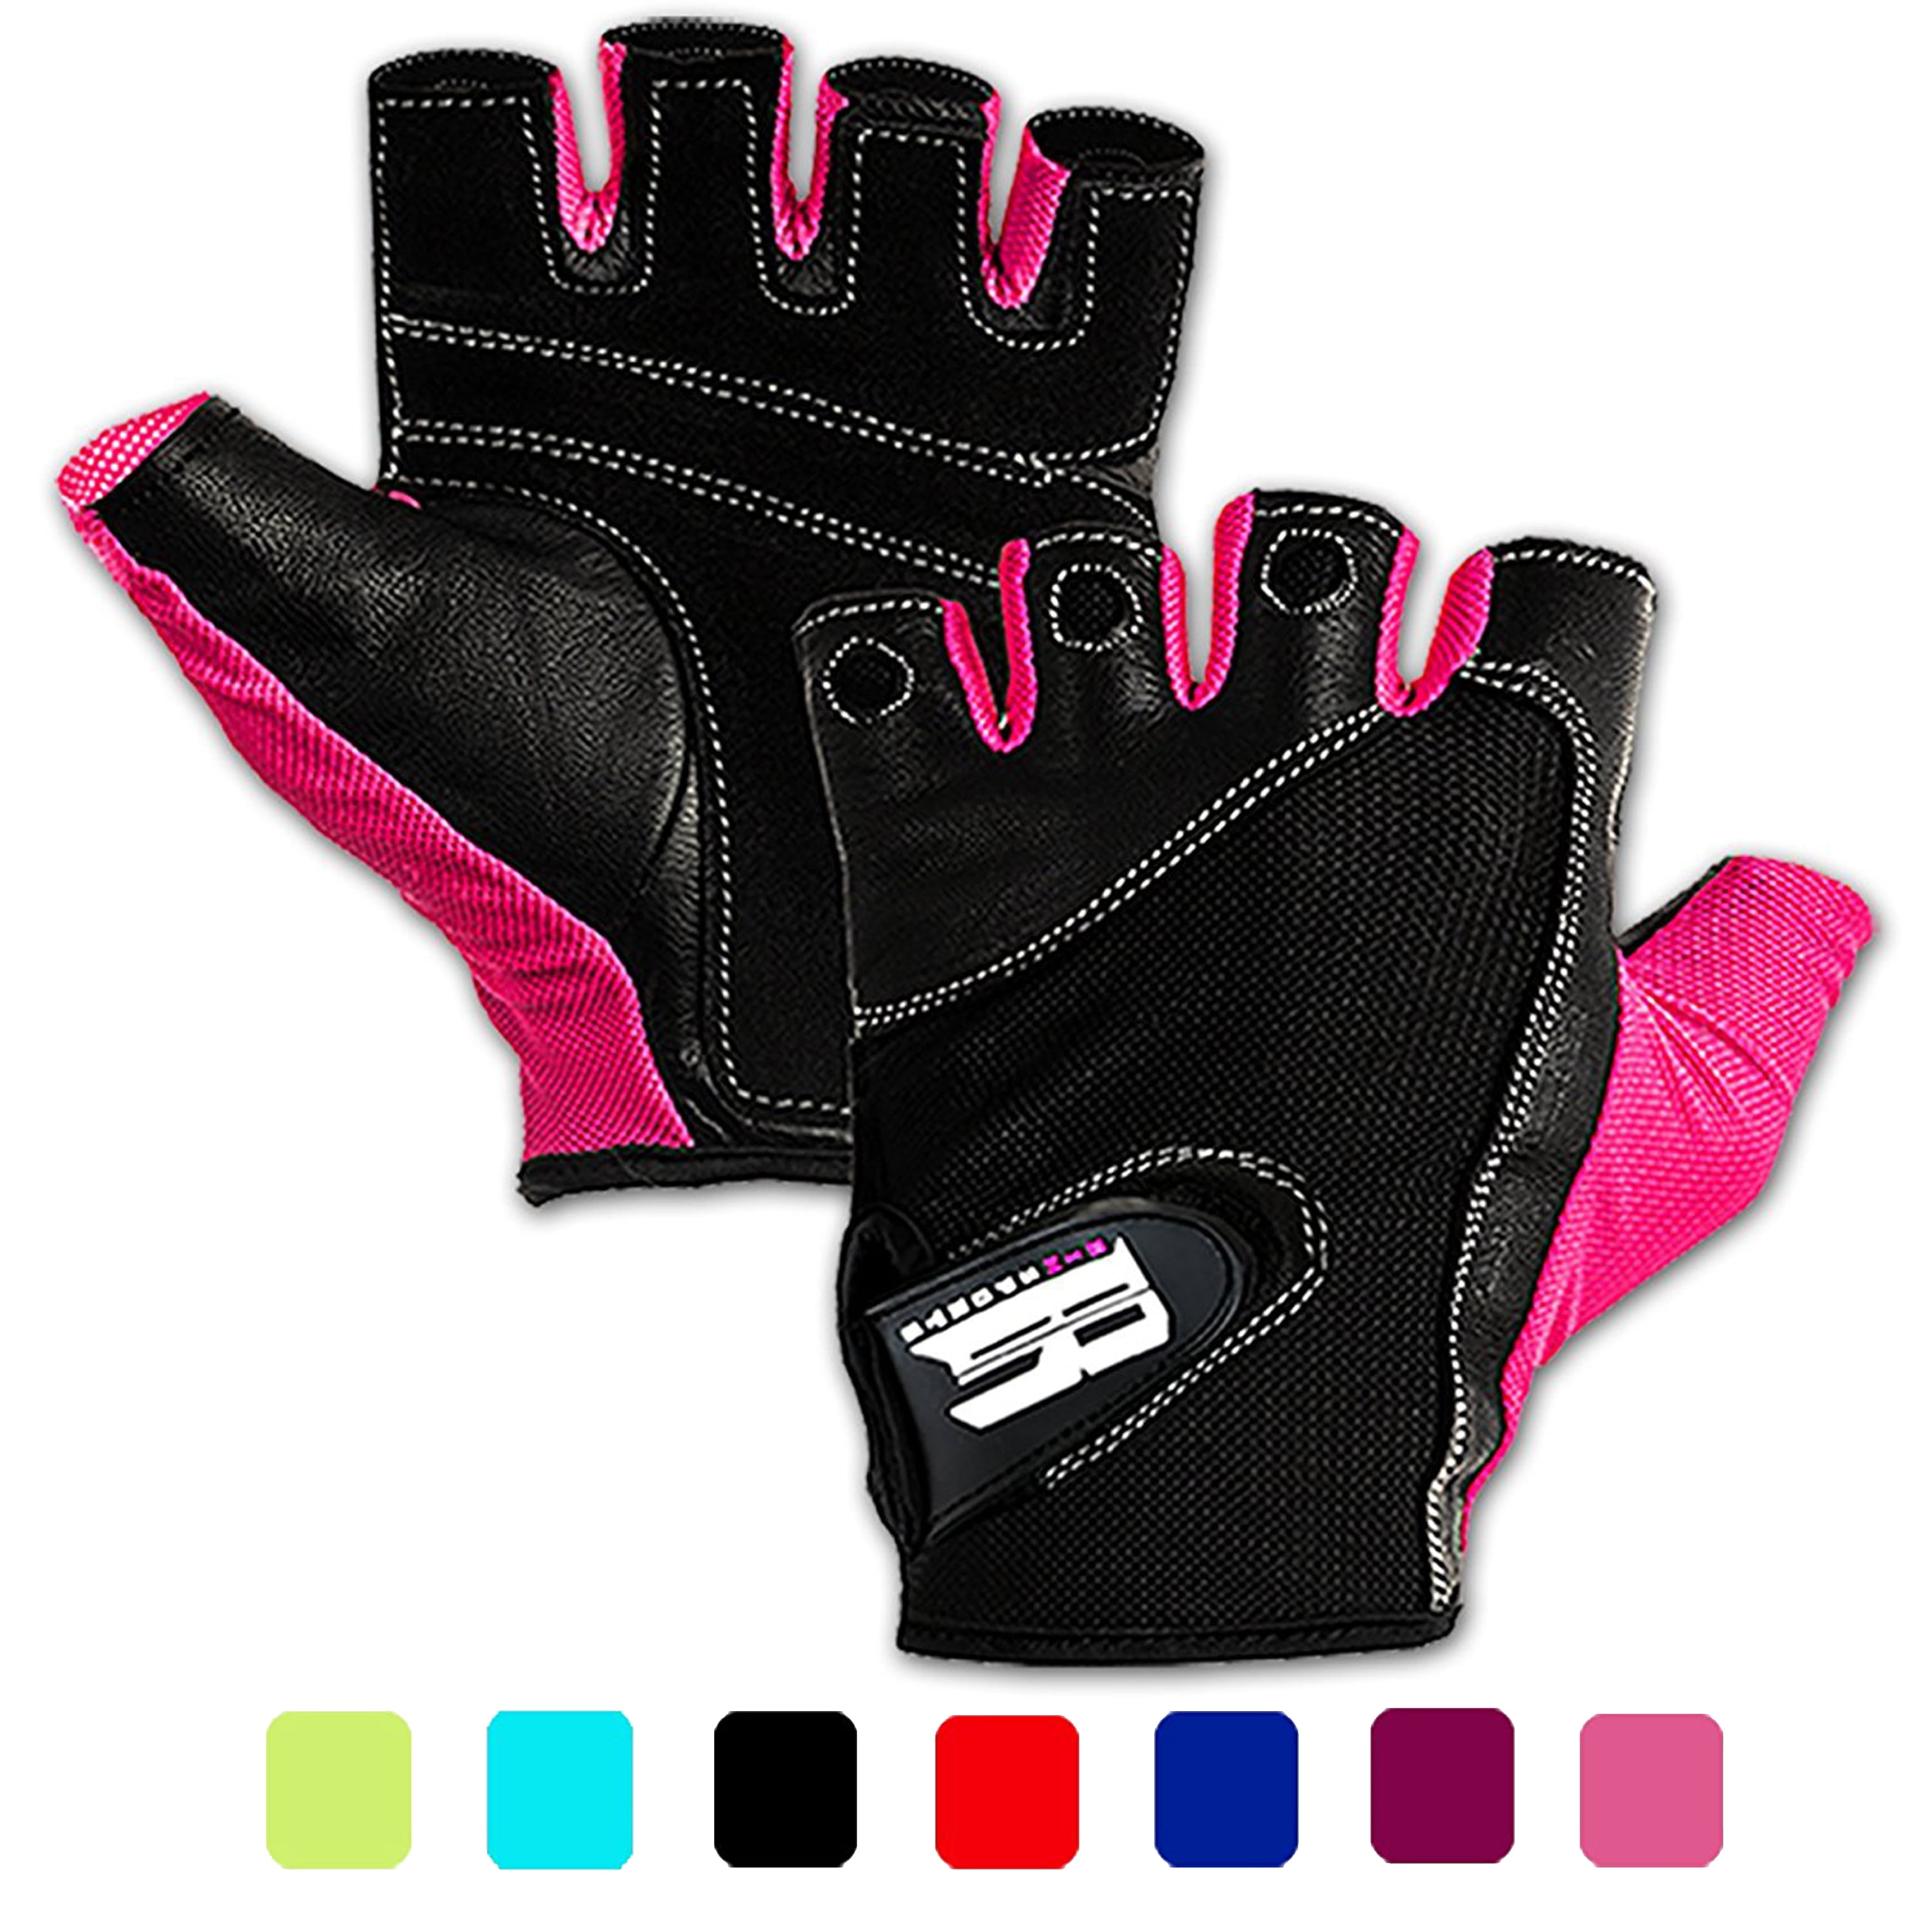 FOR WEIGHTLIFTING PUMP FITNESS WRIST SWEAT CENTRAL PREMIUM GYM GLOVES 